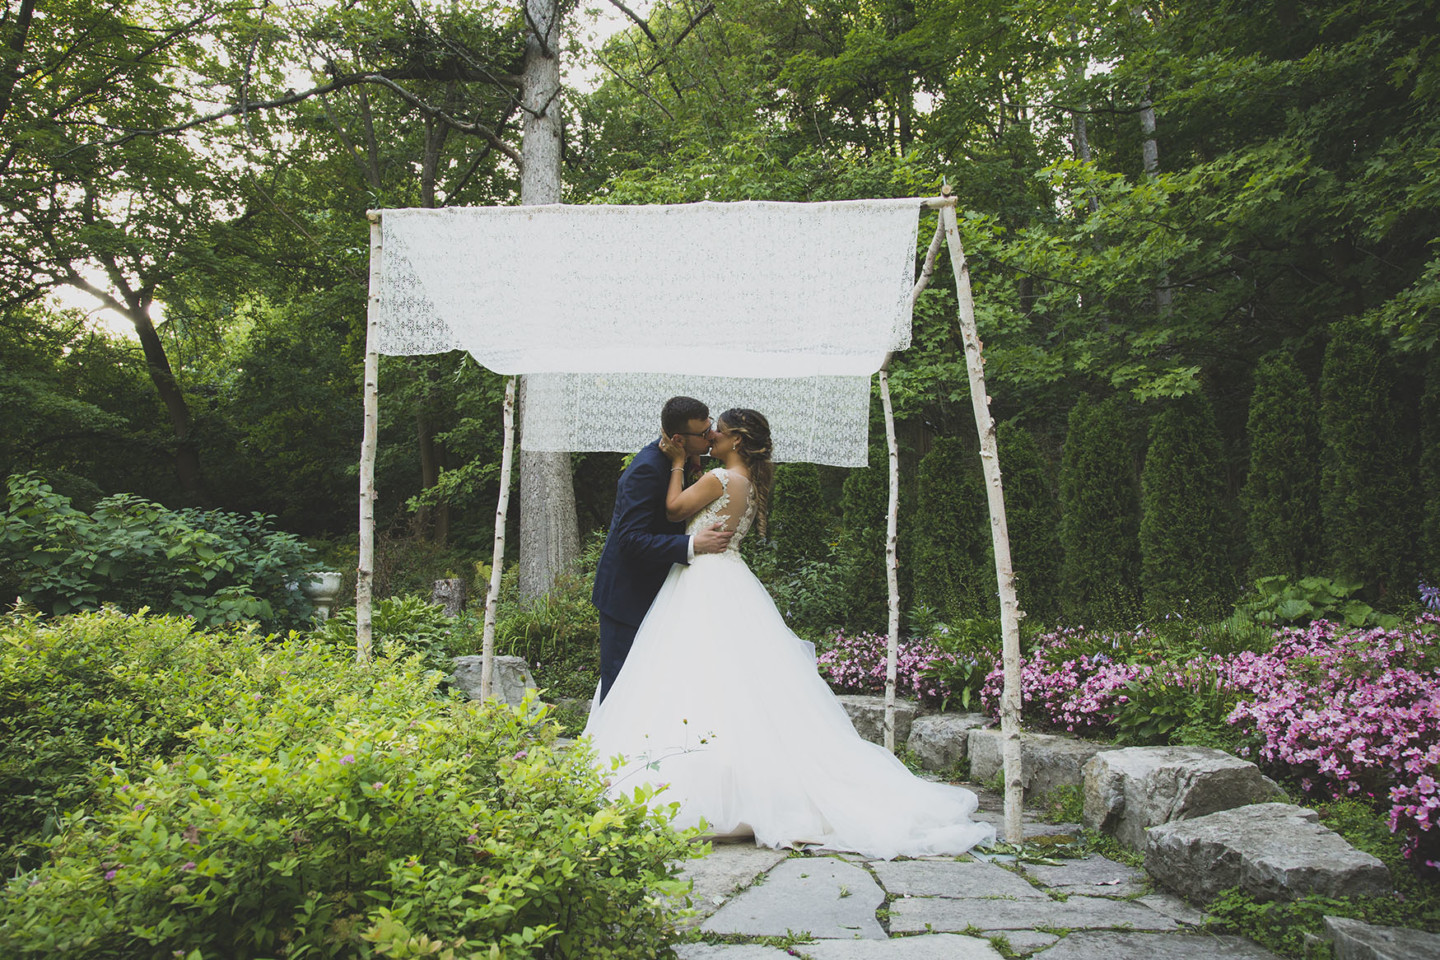 bride and groom kissing in a garden under a white lace canopy